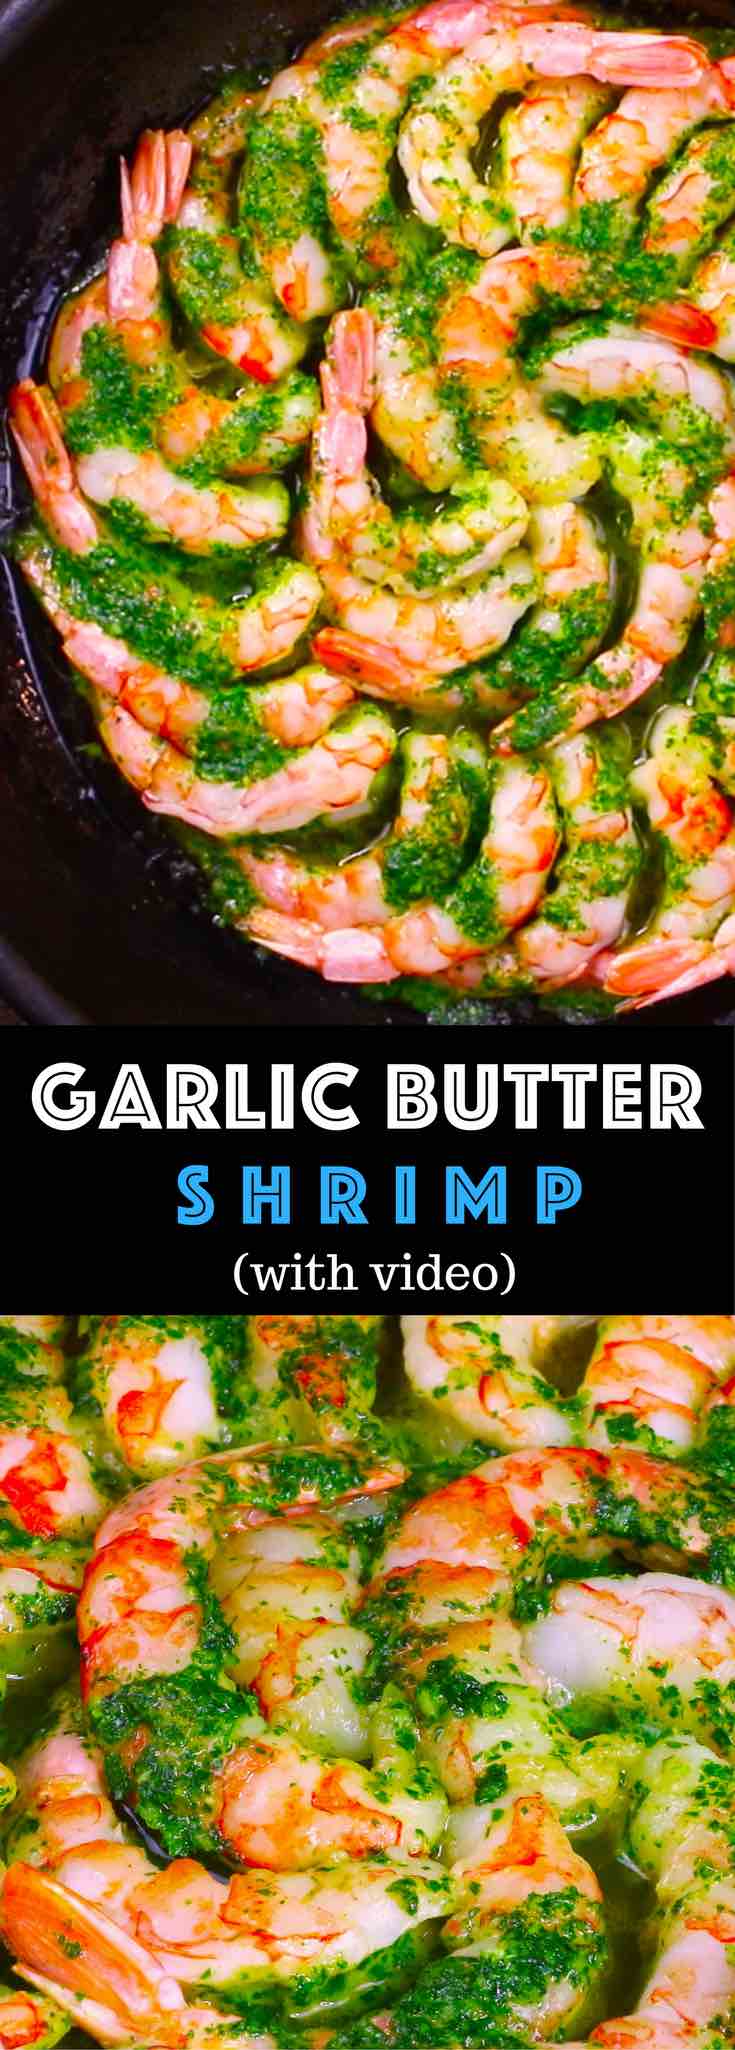 Easy Garlic Butter Shrimp – One of the most unbelievably delicious shrimp recipes. Succulent shrimp baked in garlic and buttery sauce. So Good! Quick and easy dinner recipe. Video recipe. 